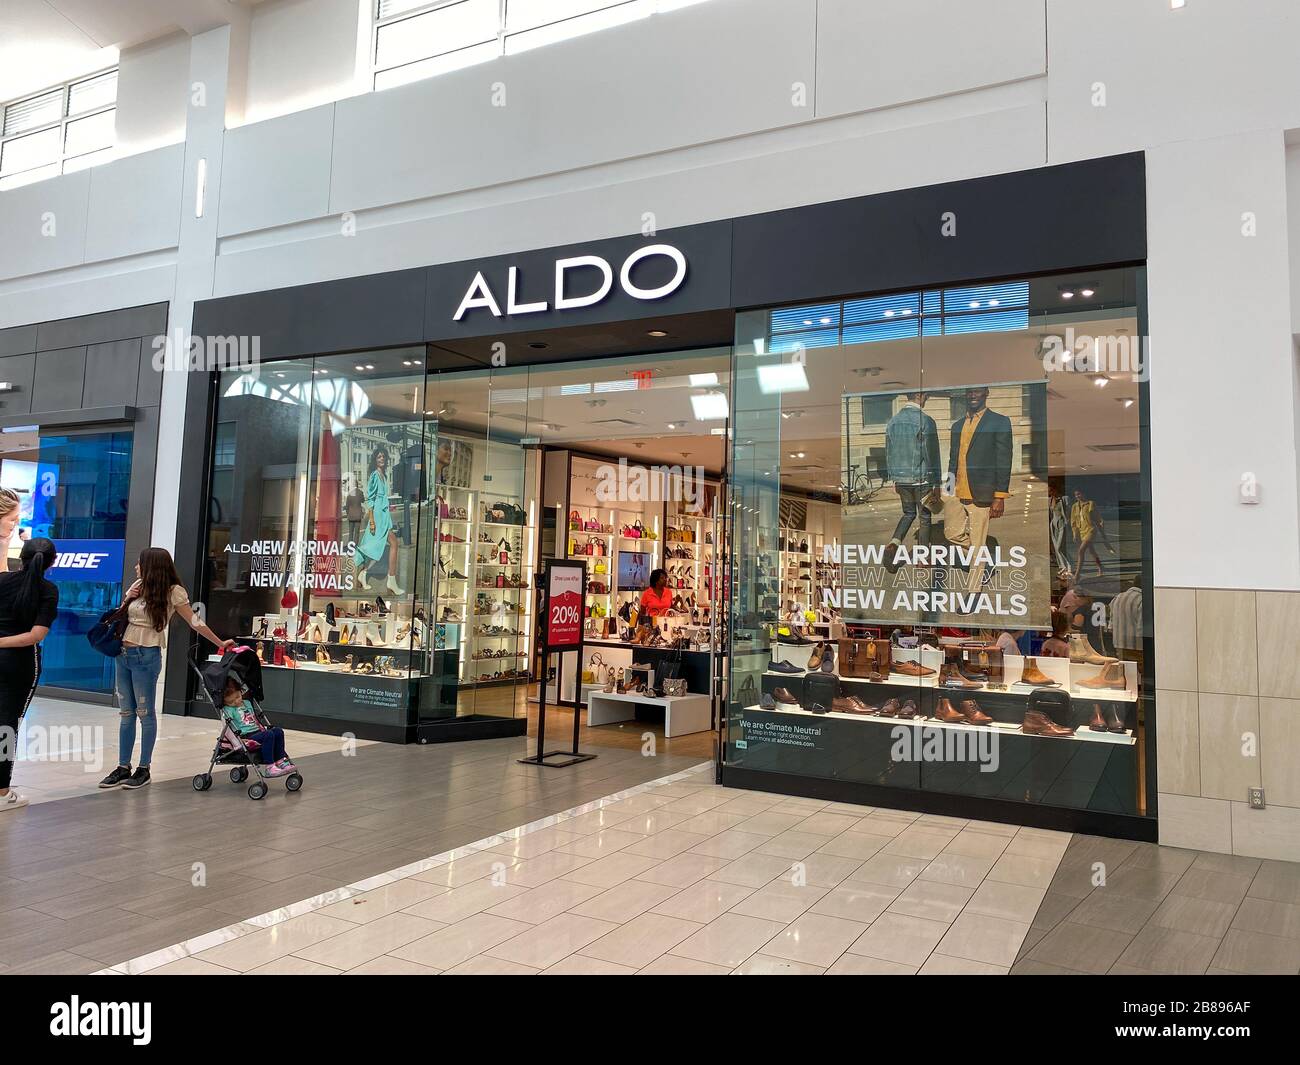 FL/USA-2/17/20: Aldo retail fashion shoes and accessories store an indoor mall in Orlando, FL Stock Photo - Alamy